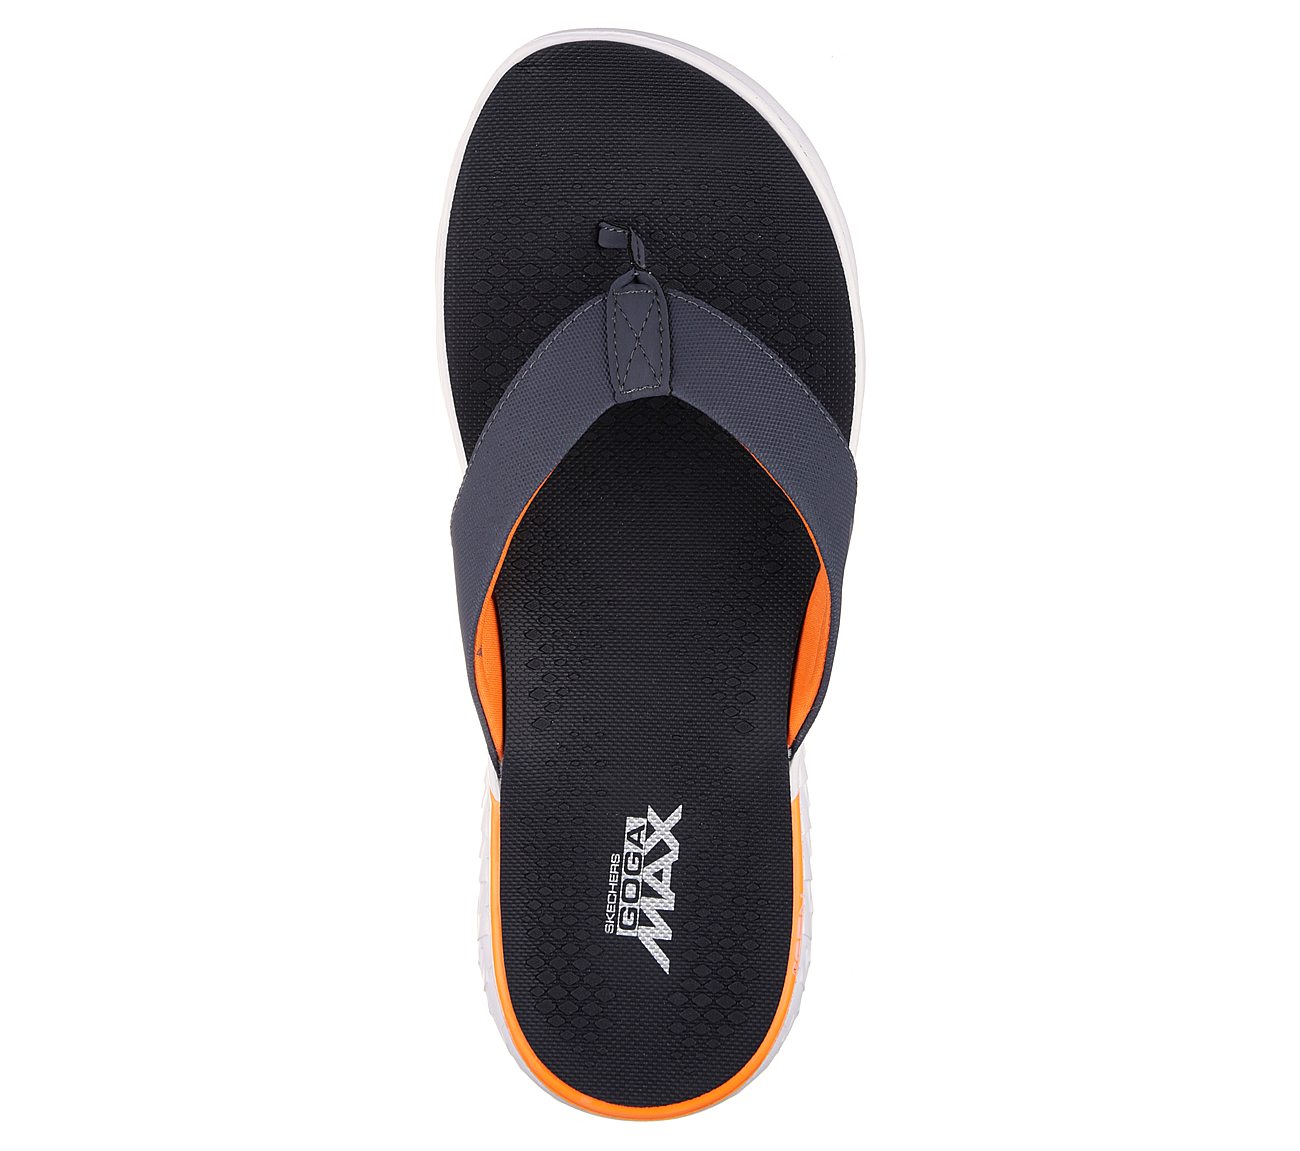 ON-THE-GO 400 - SHORE, CHARCOAL/ORANGE Footwear Top View